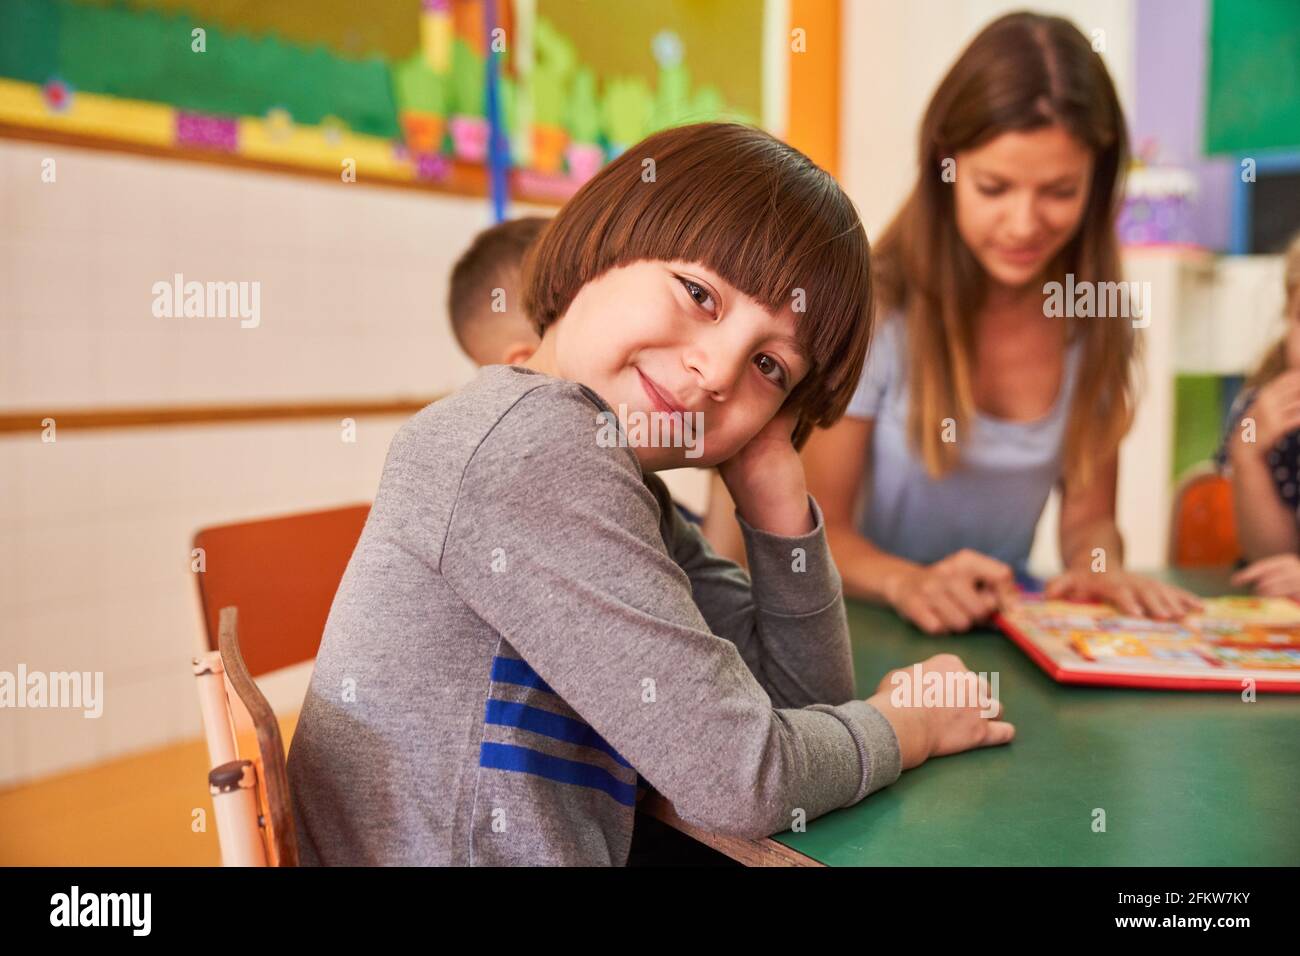 Happy boy in kindergarten or after-school care center playing with other children Stock Photo